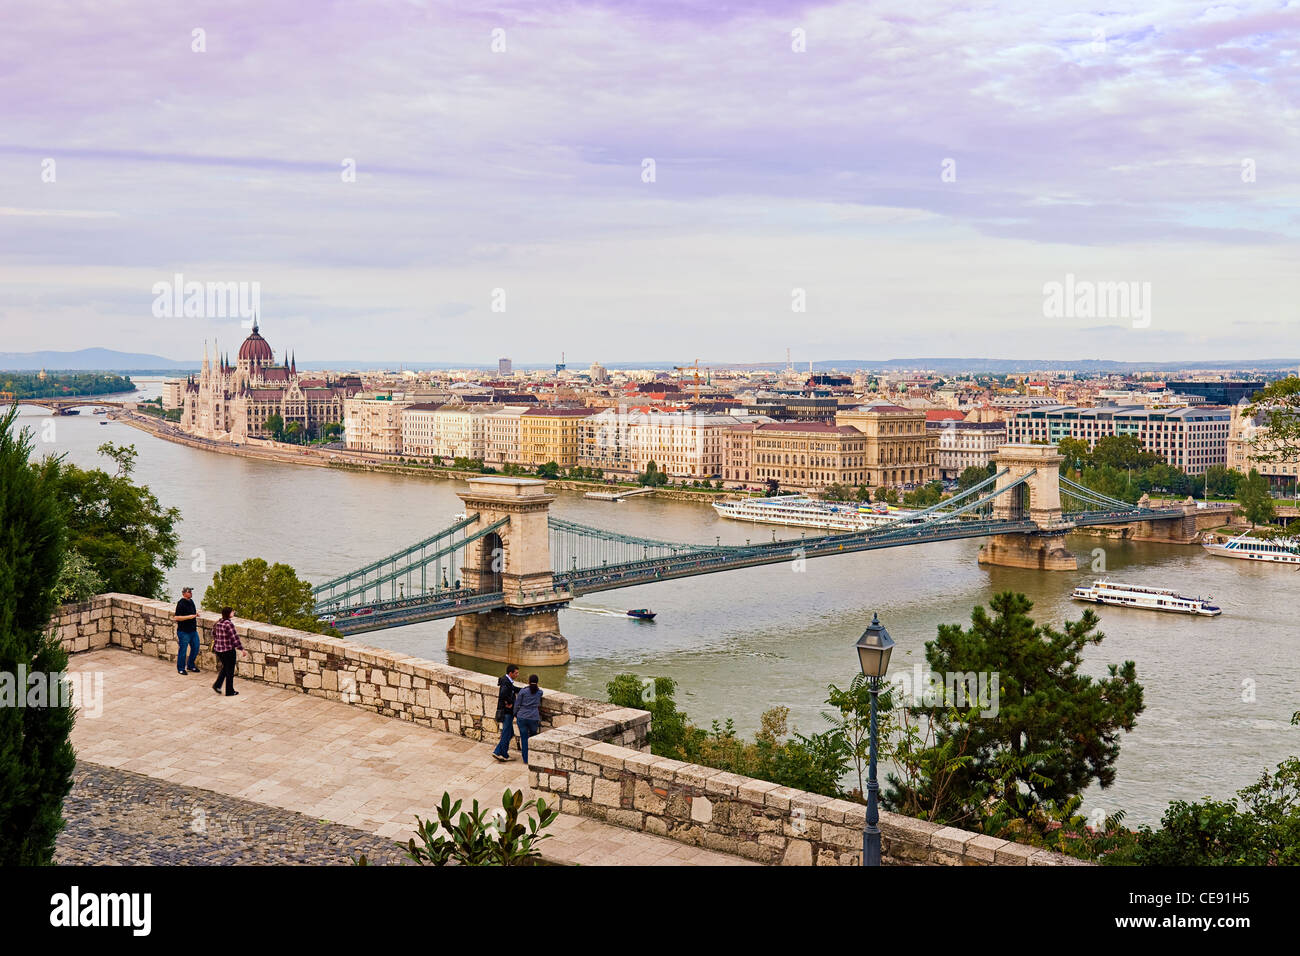 View of Pest side and Danube River including the Parliament and Chain Bridge, Budapest, Hungary. View from Castle Hill District. Stock Photo